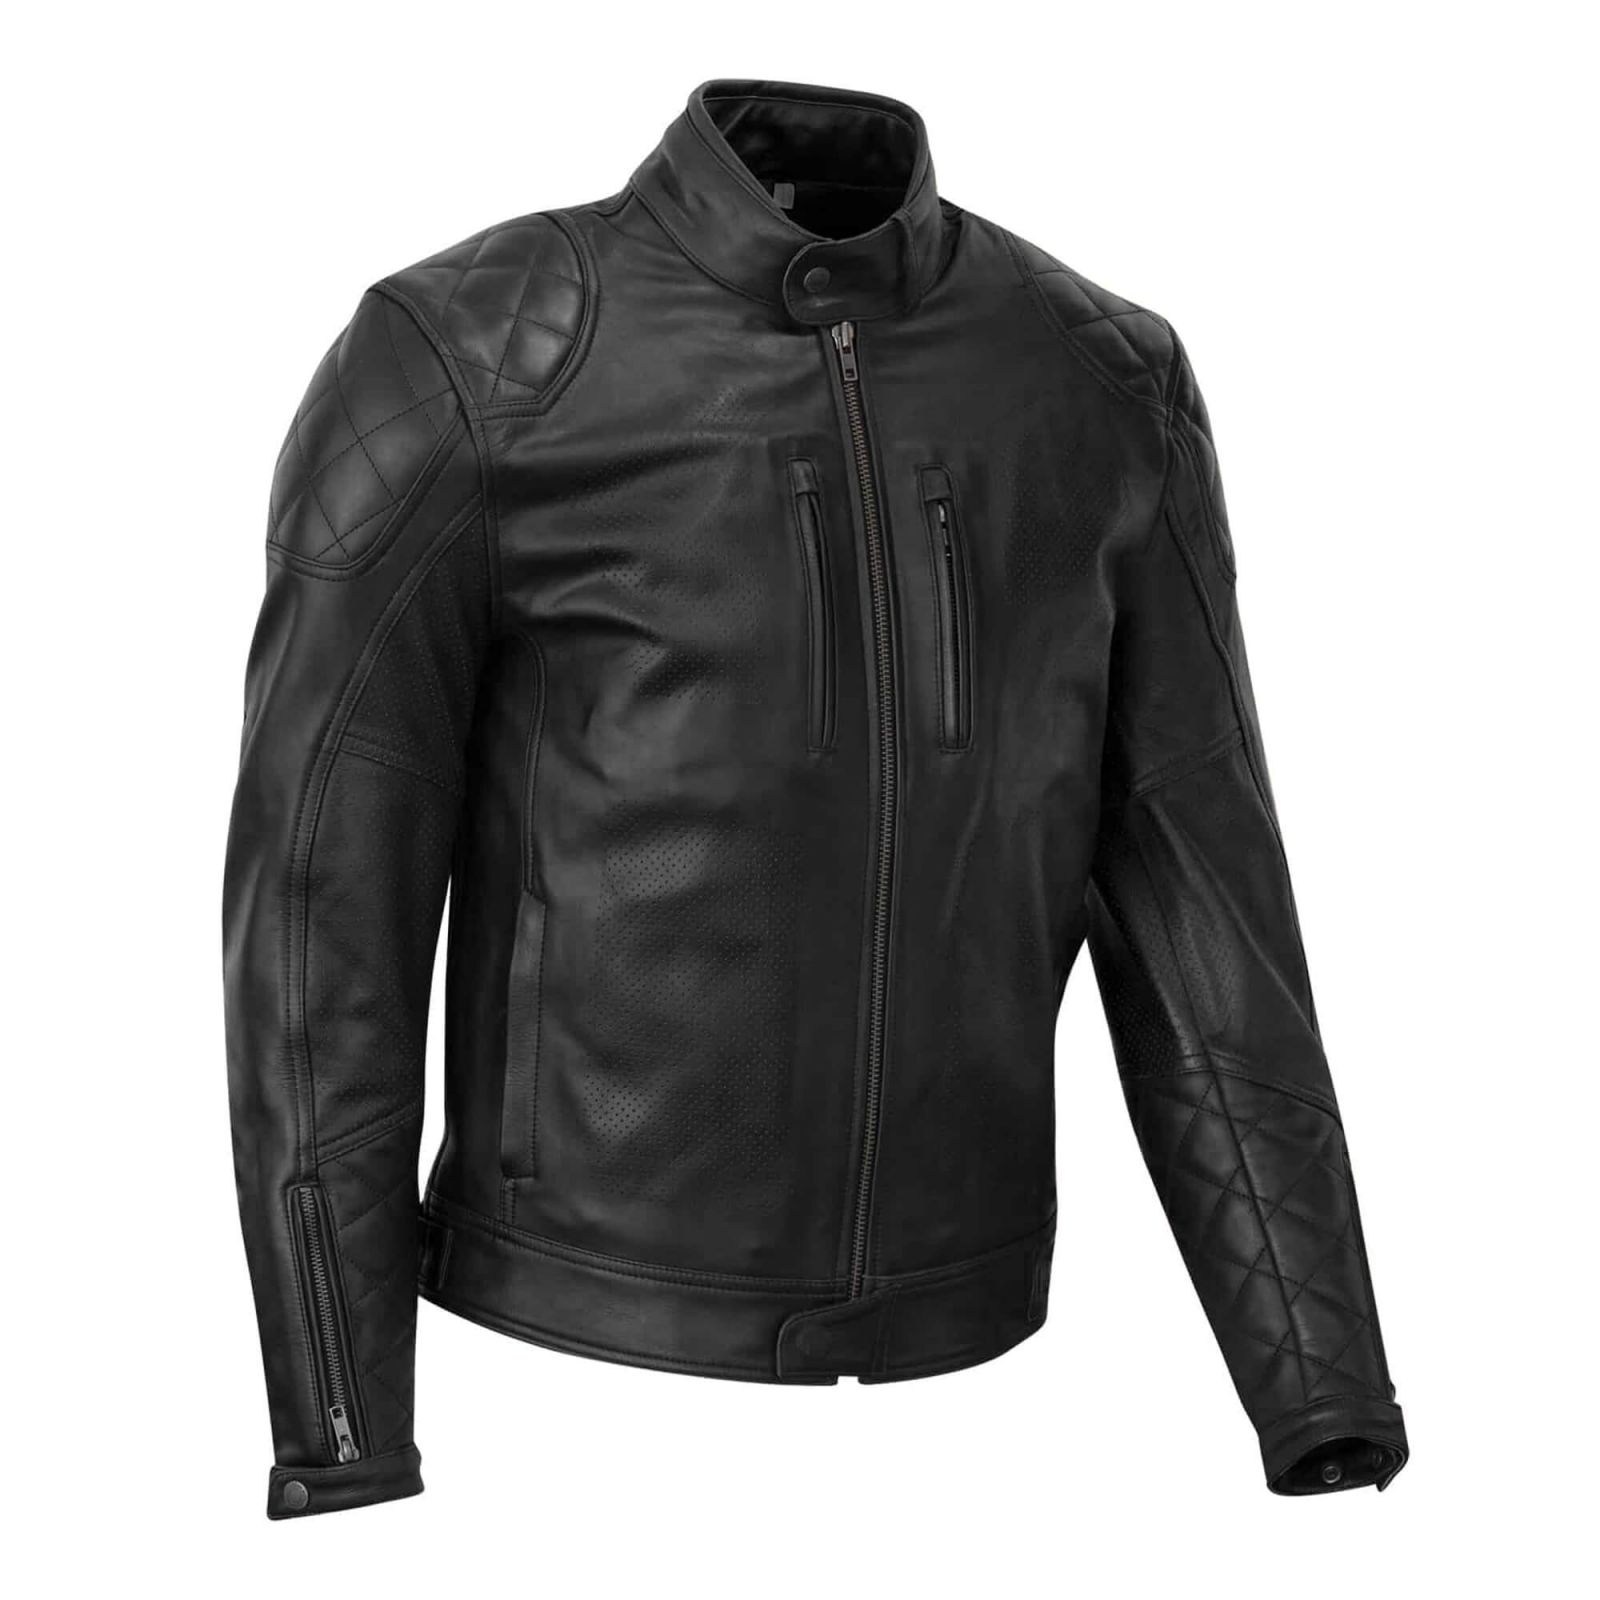 Women's FXRG Perforated Leather Jacket